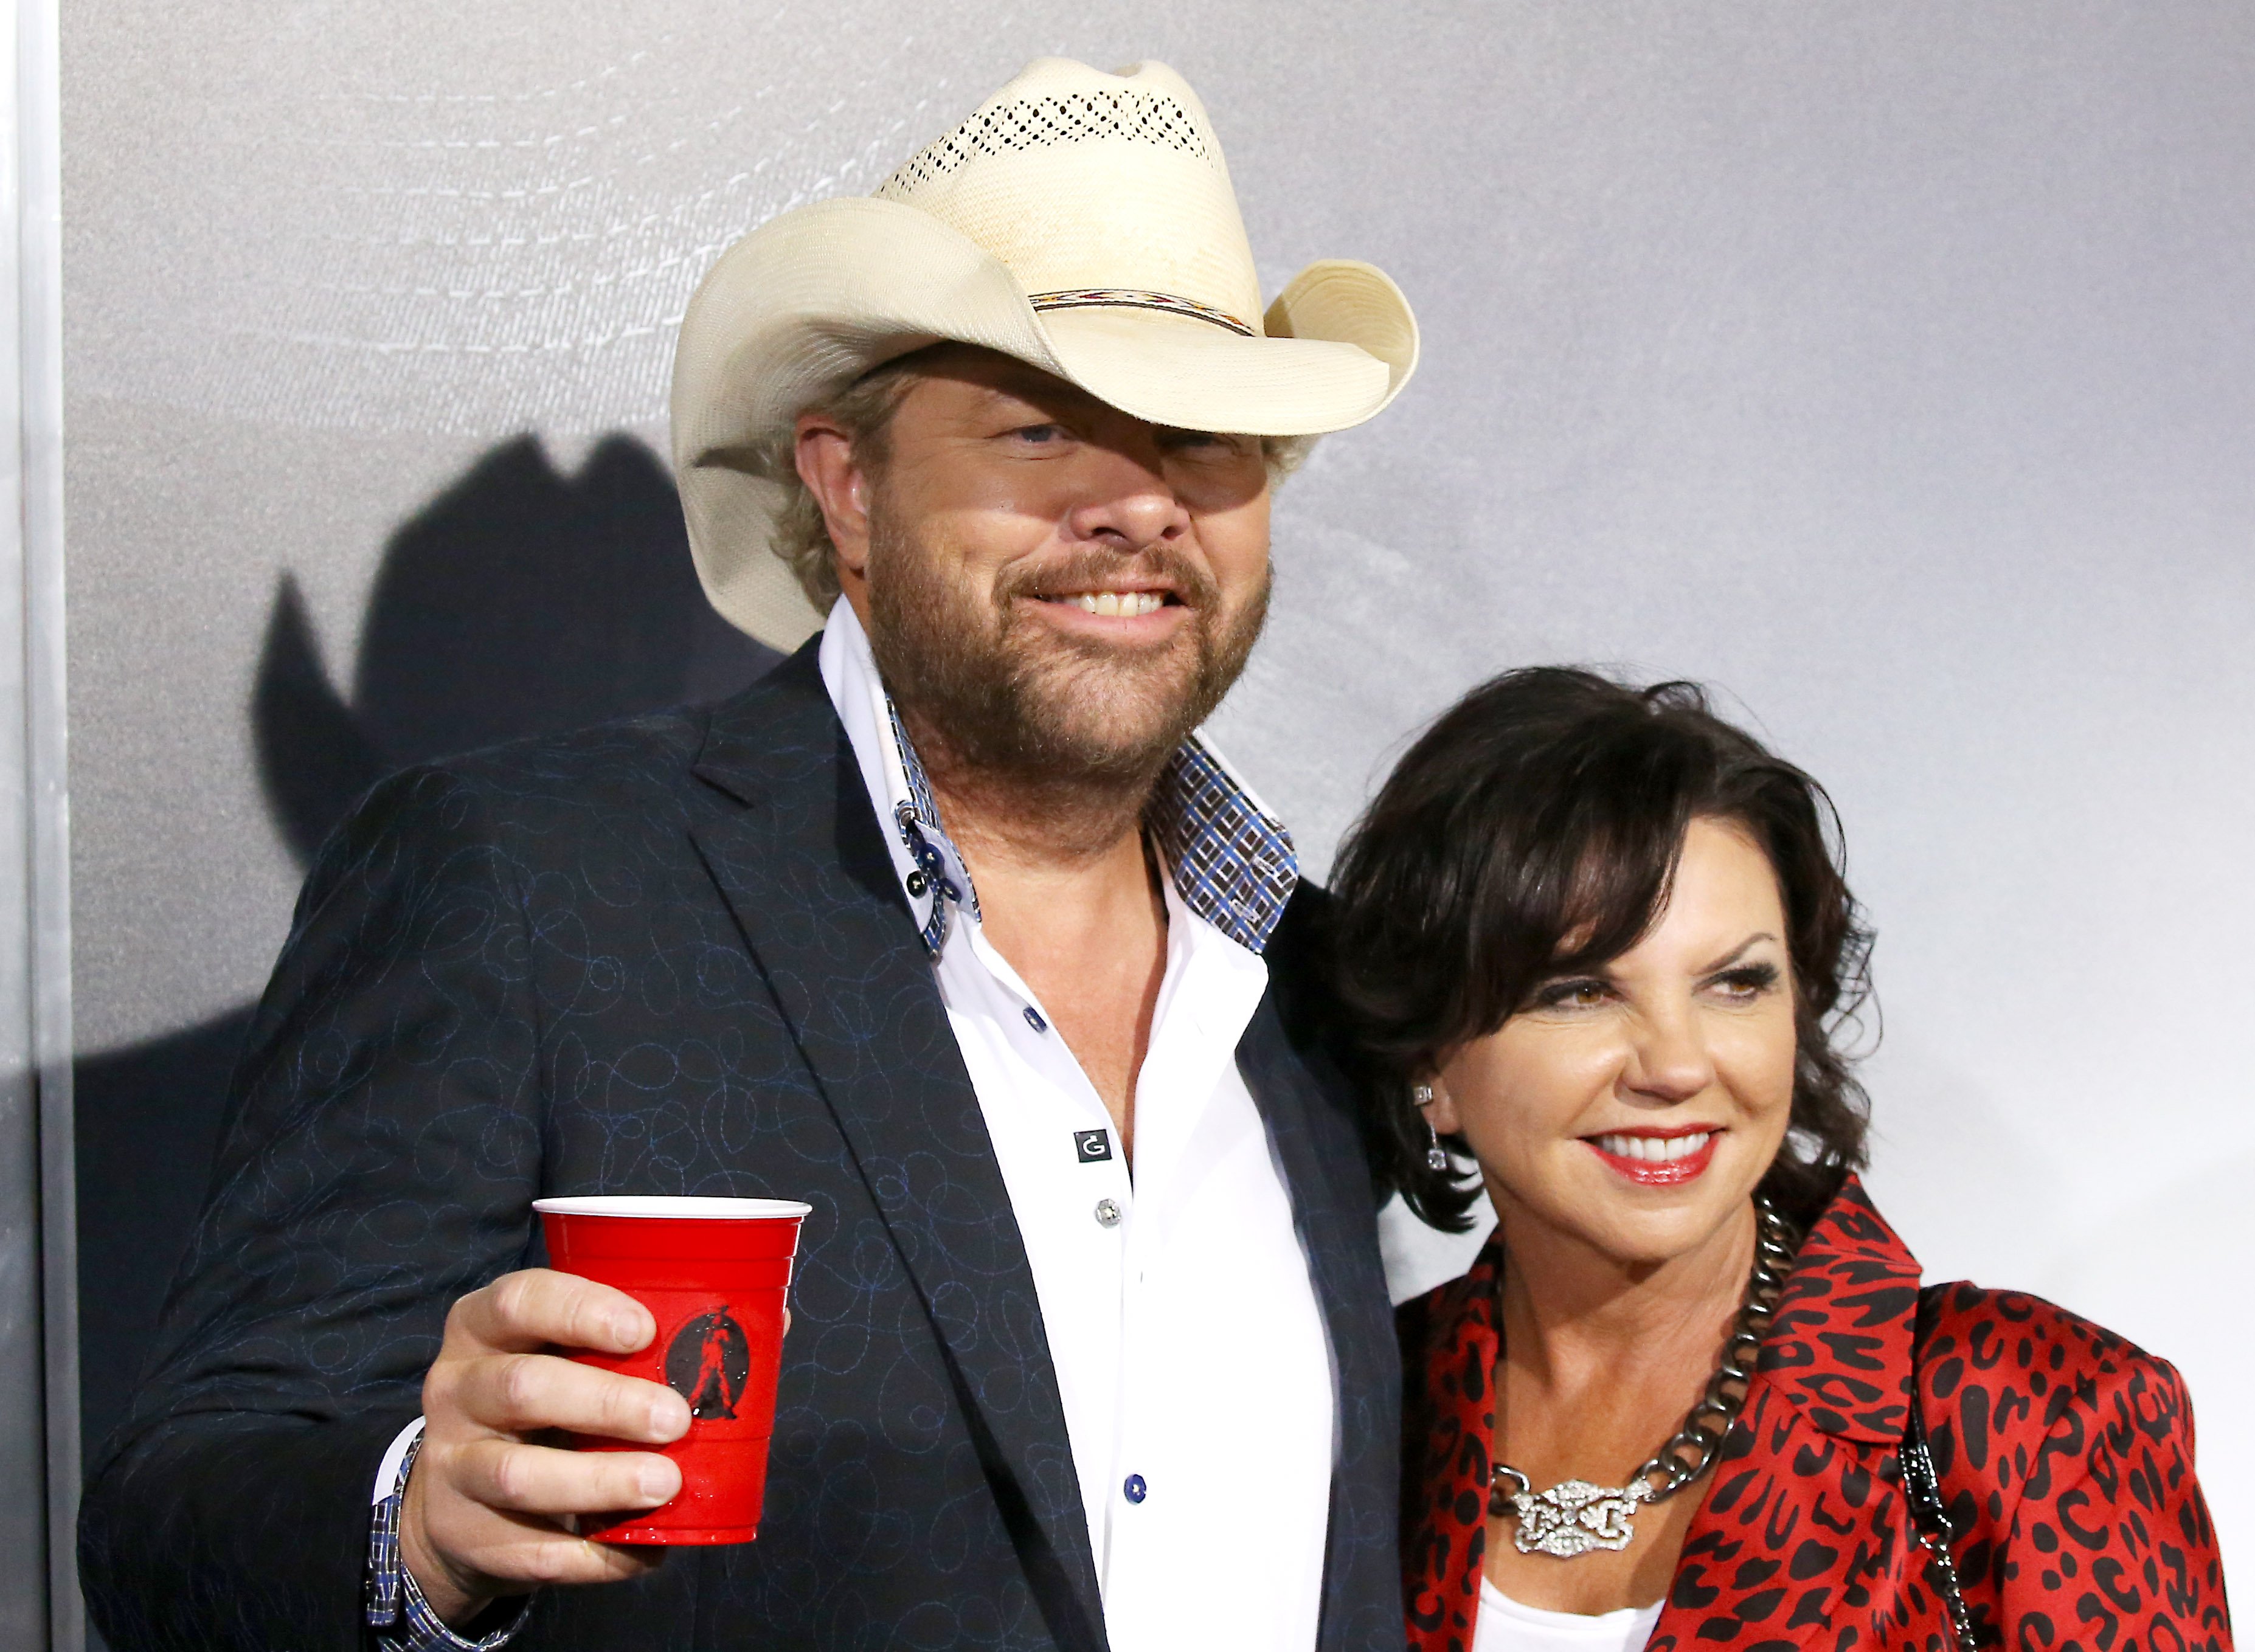 Toby Keith and Tricia Lucus attend the Warner Bros. Pictures world premiere of "The Mule" held at Regency Village Theatre on December 10, 2018, in Westwood, California. | Source: Getty Images